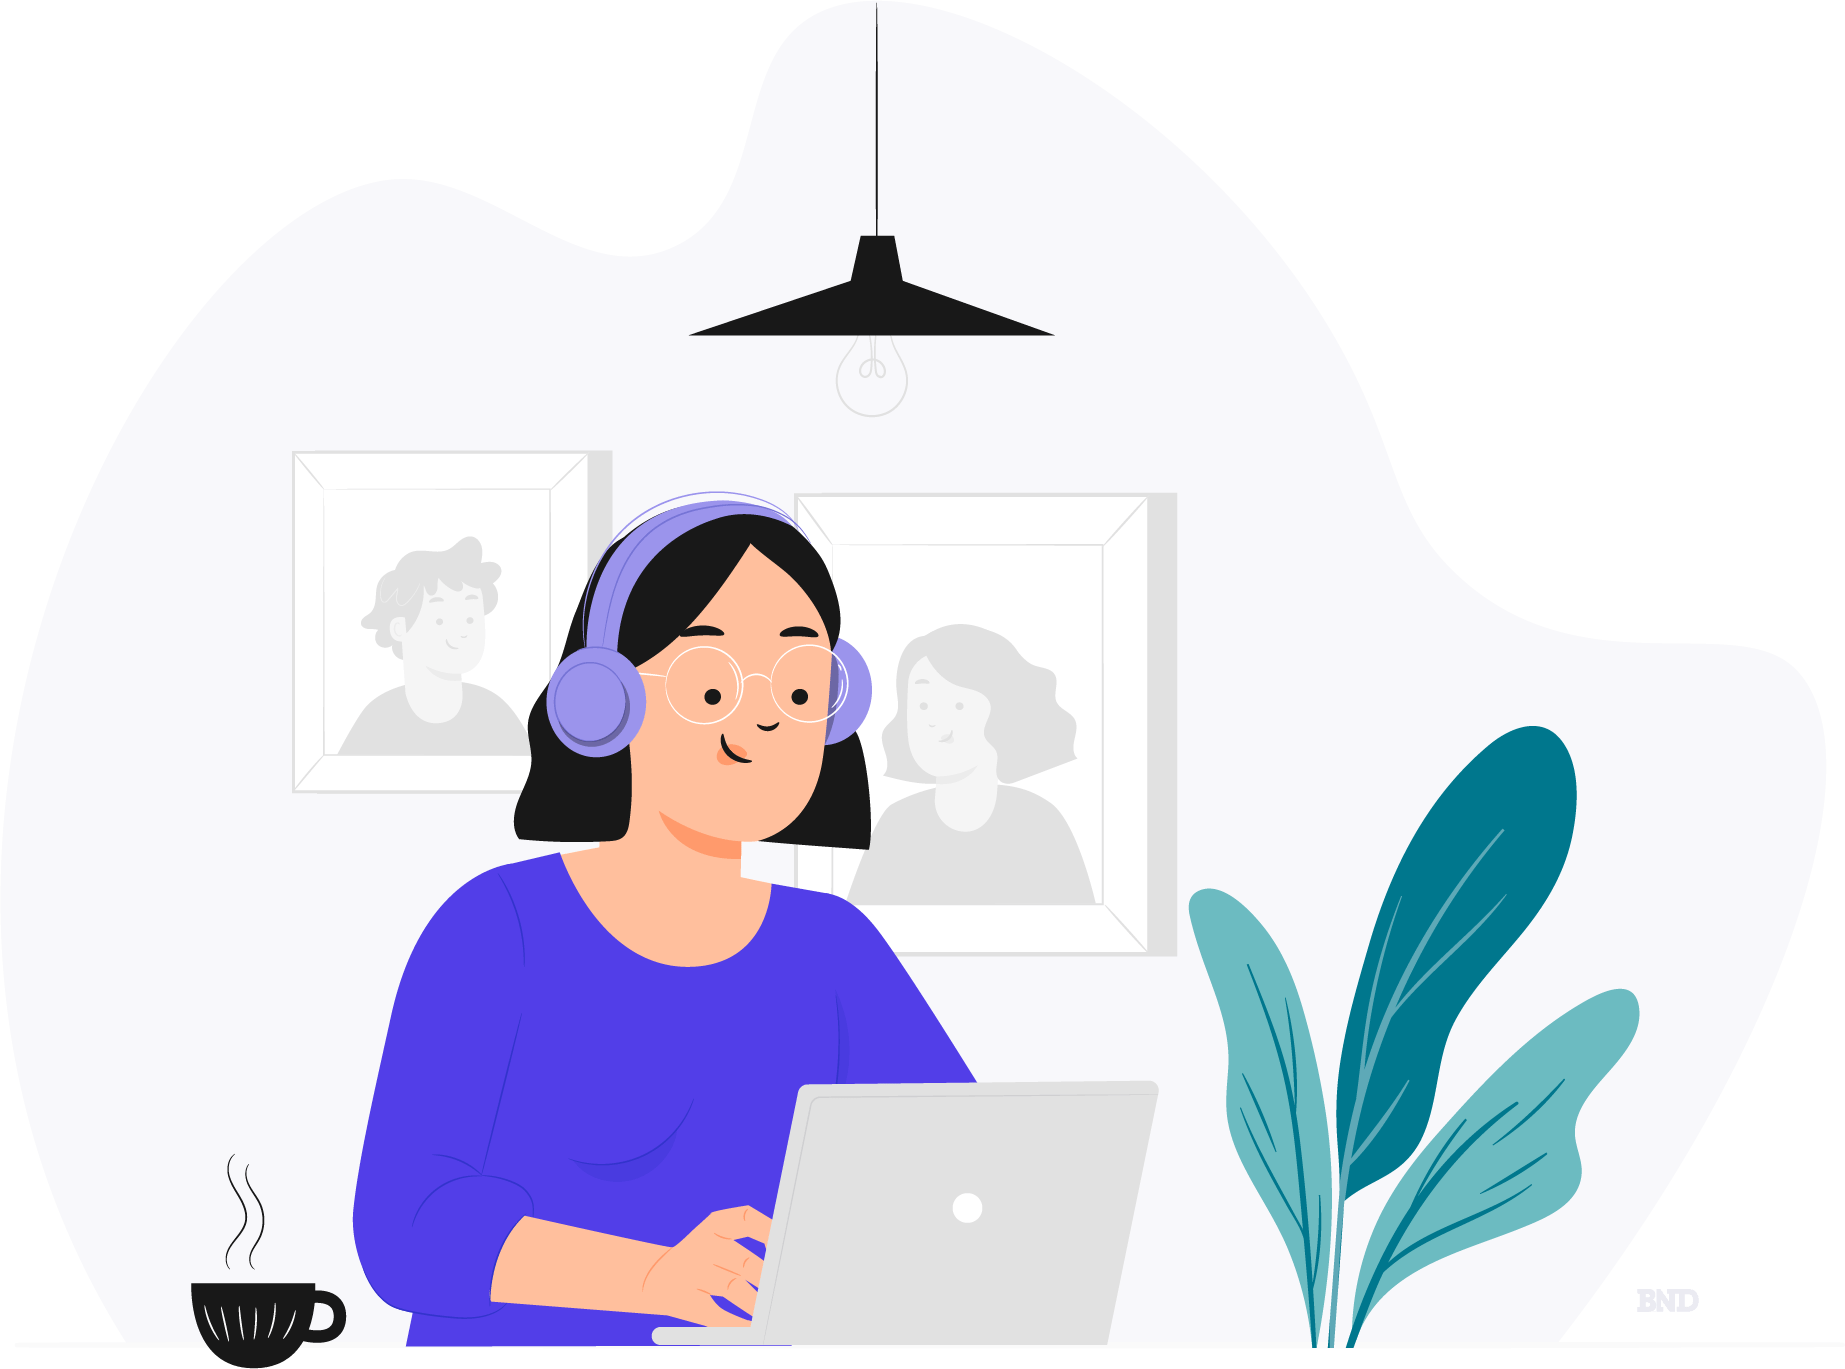 graphic of a person wearing headphones while using a laptop